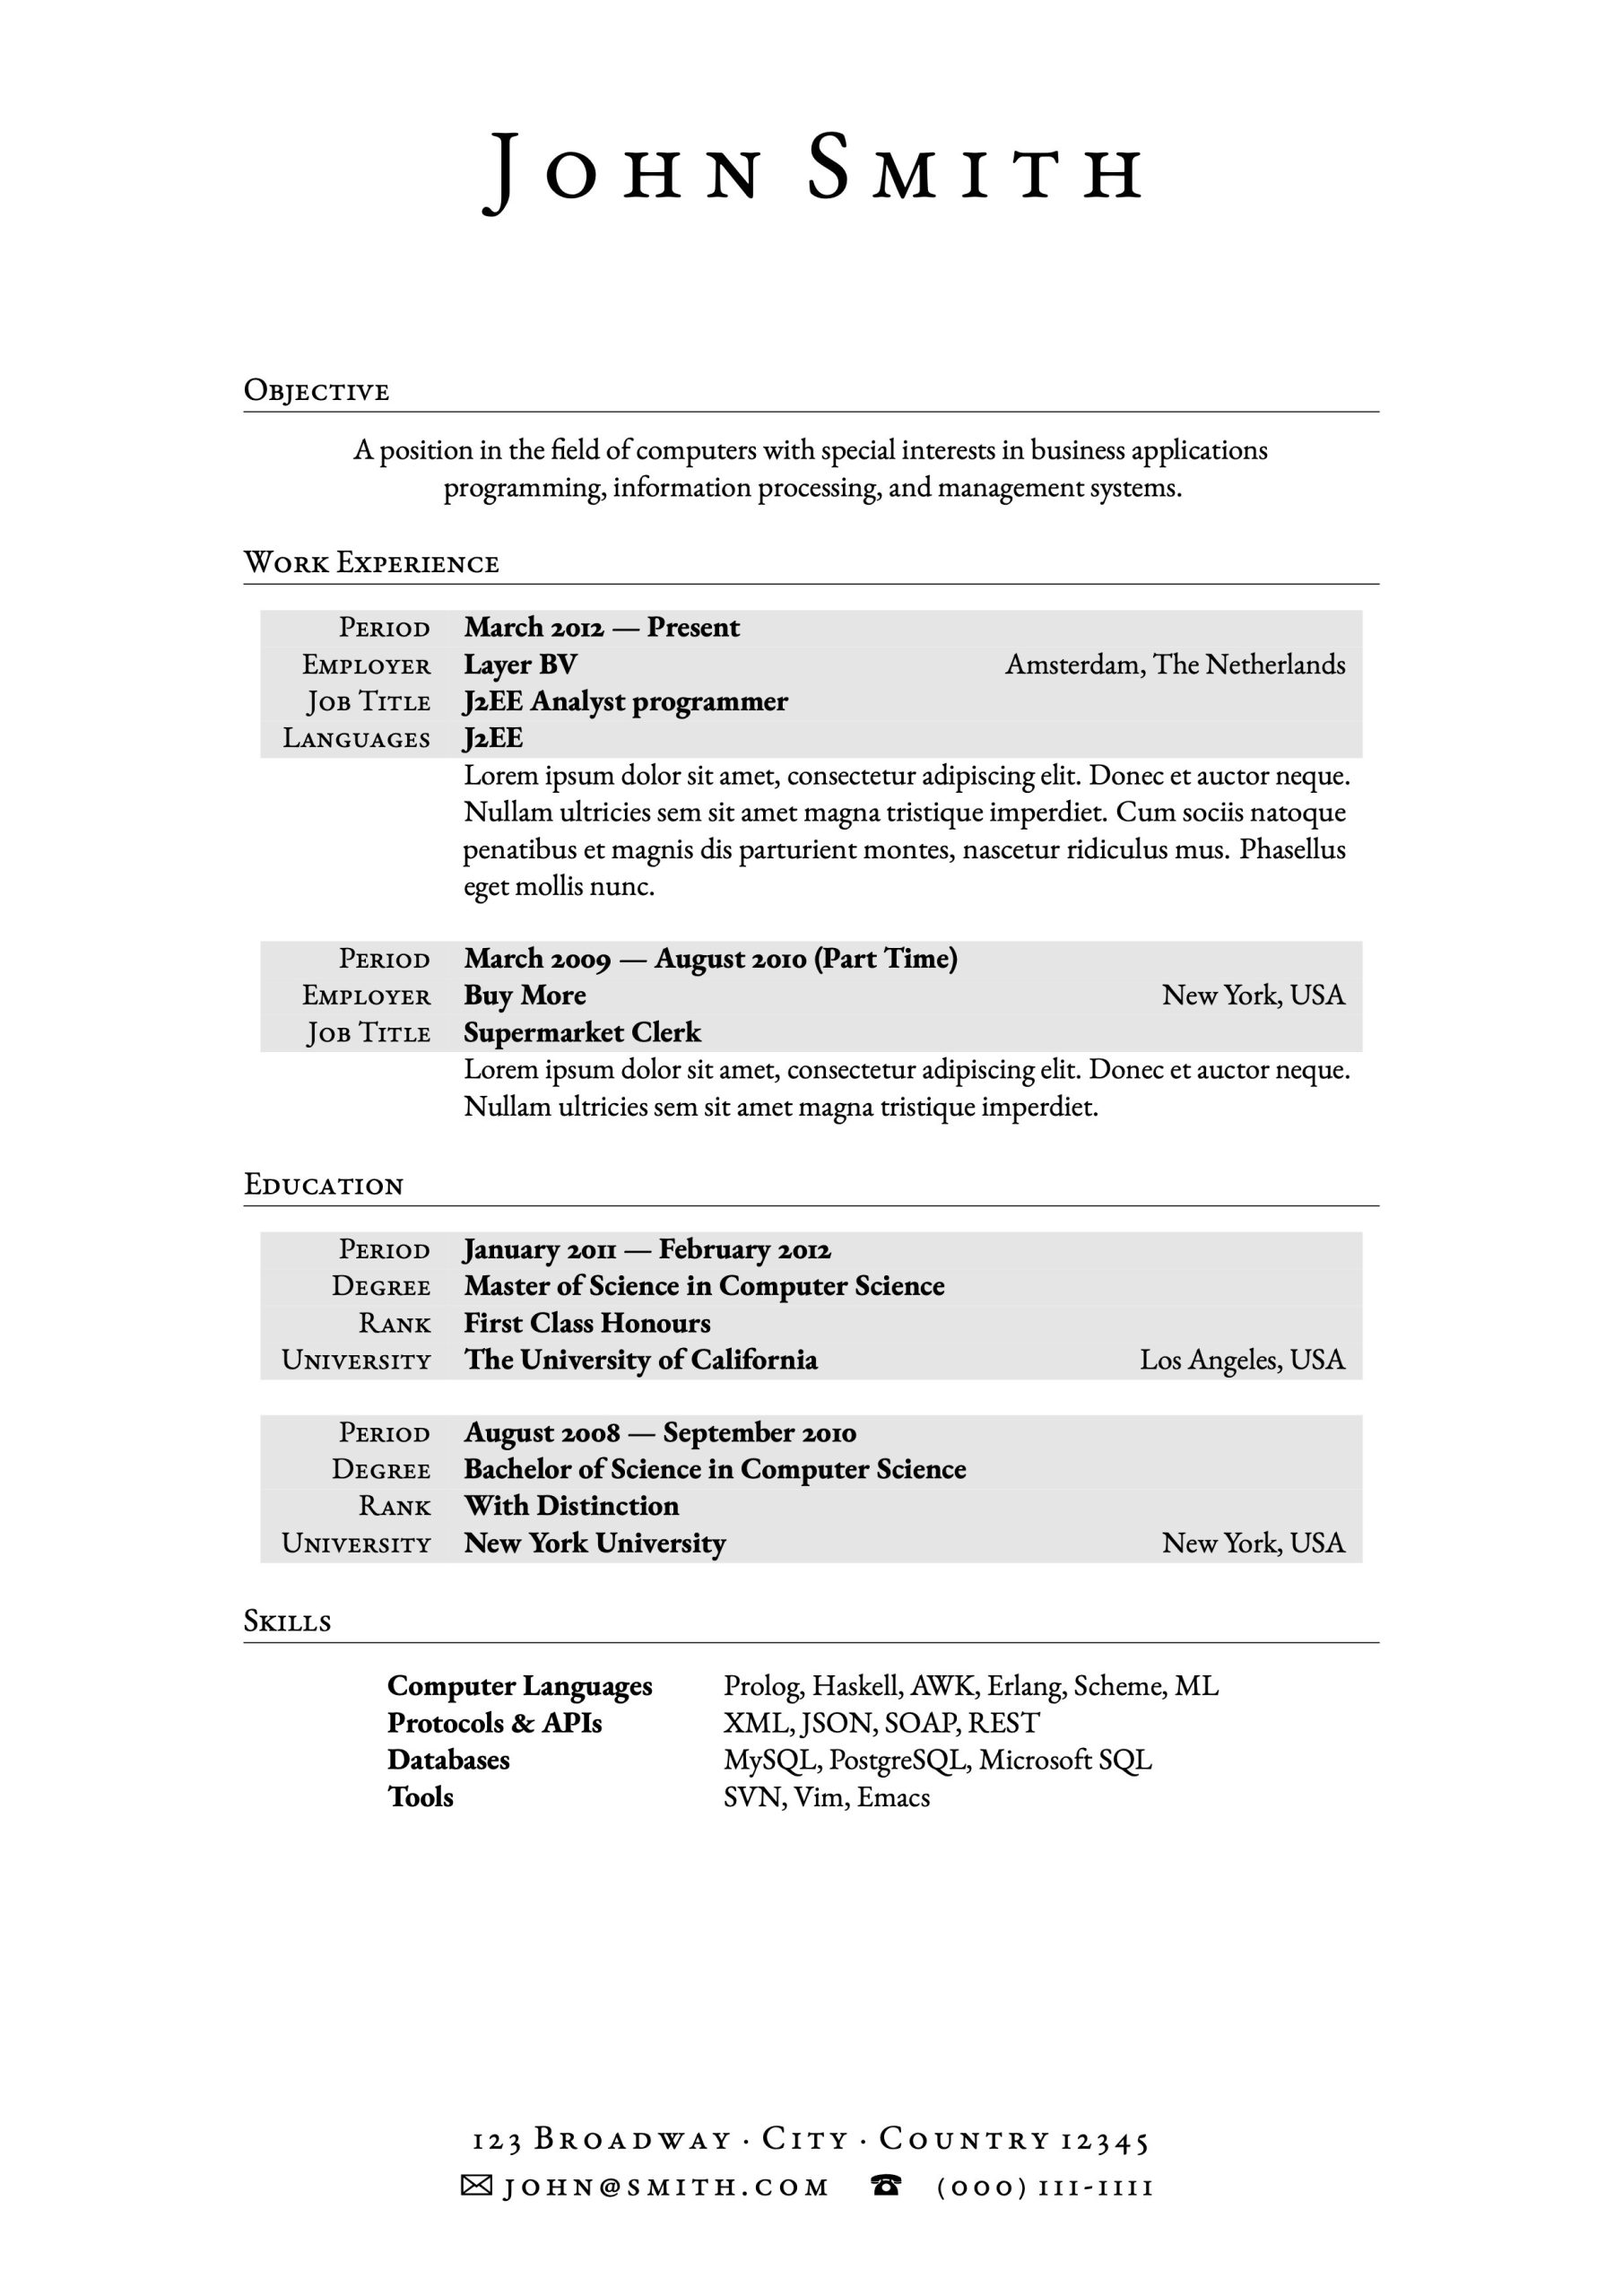 Sample Resume for Us It Jobs Latex Templates – Cvs and Resumes